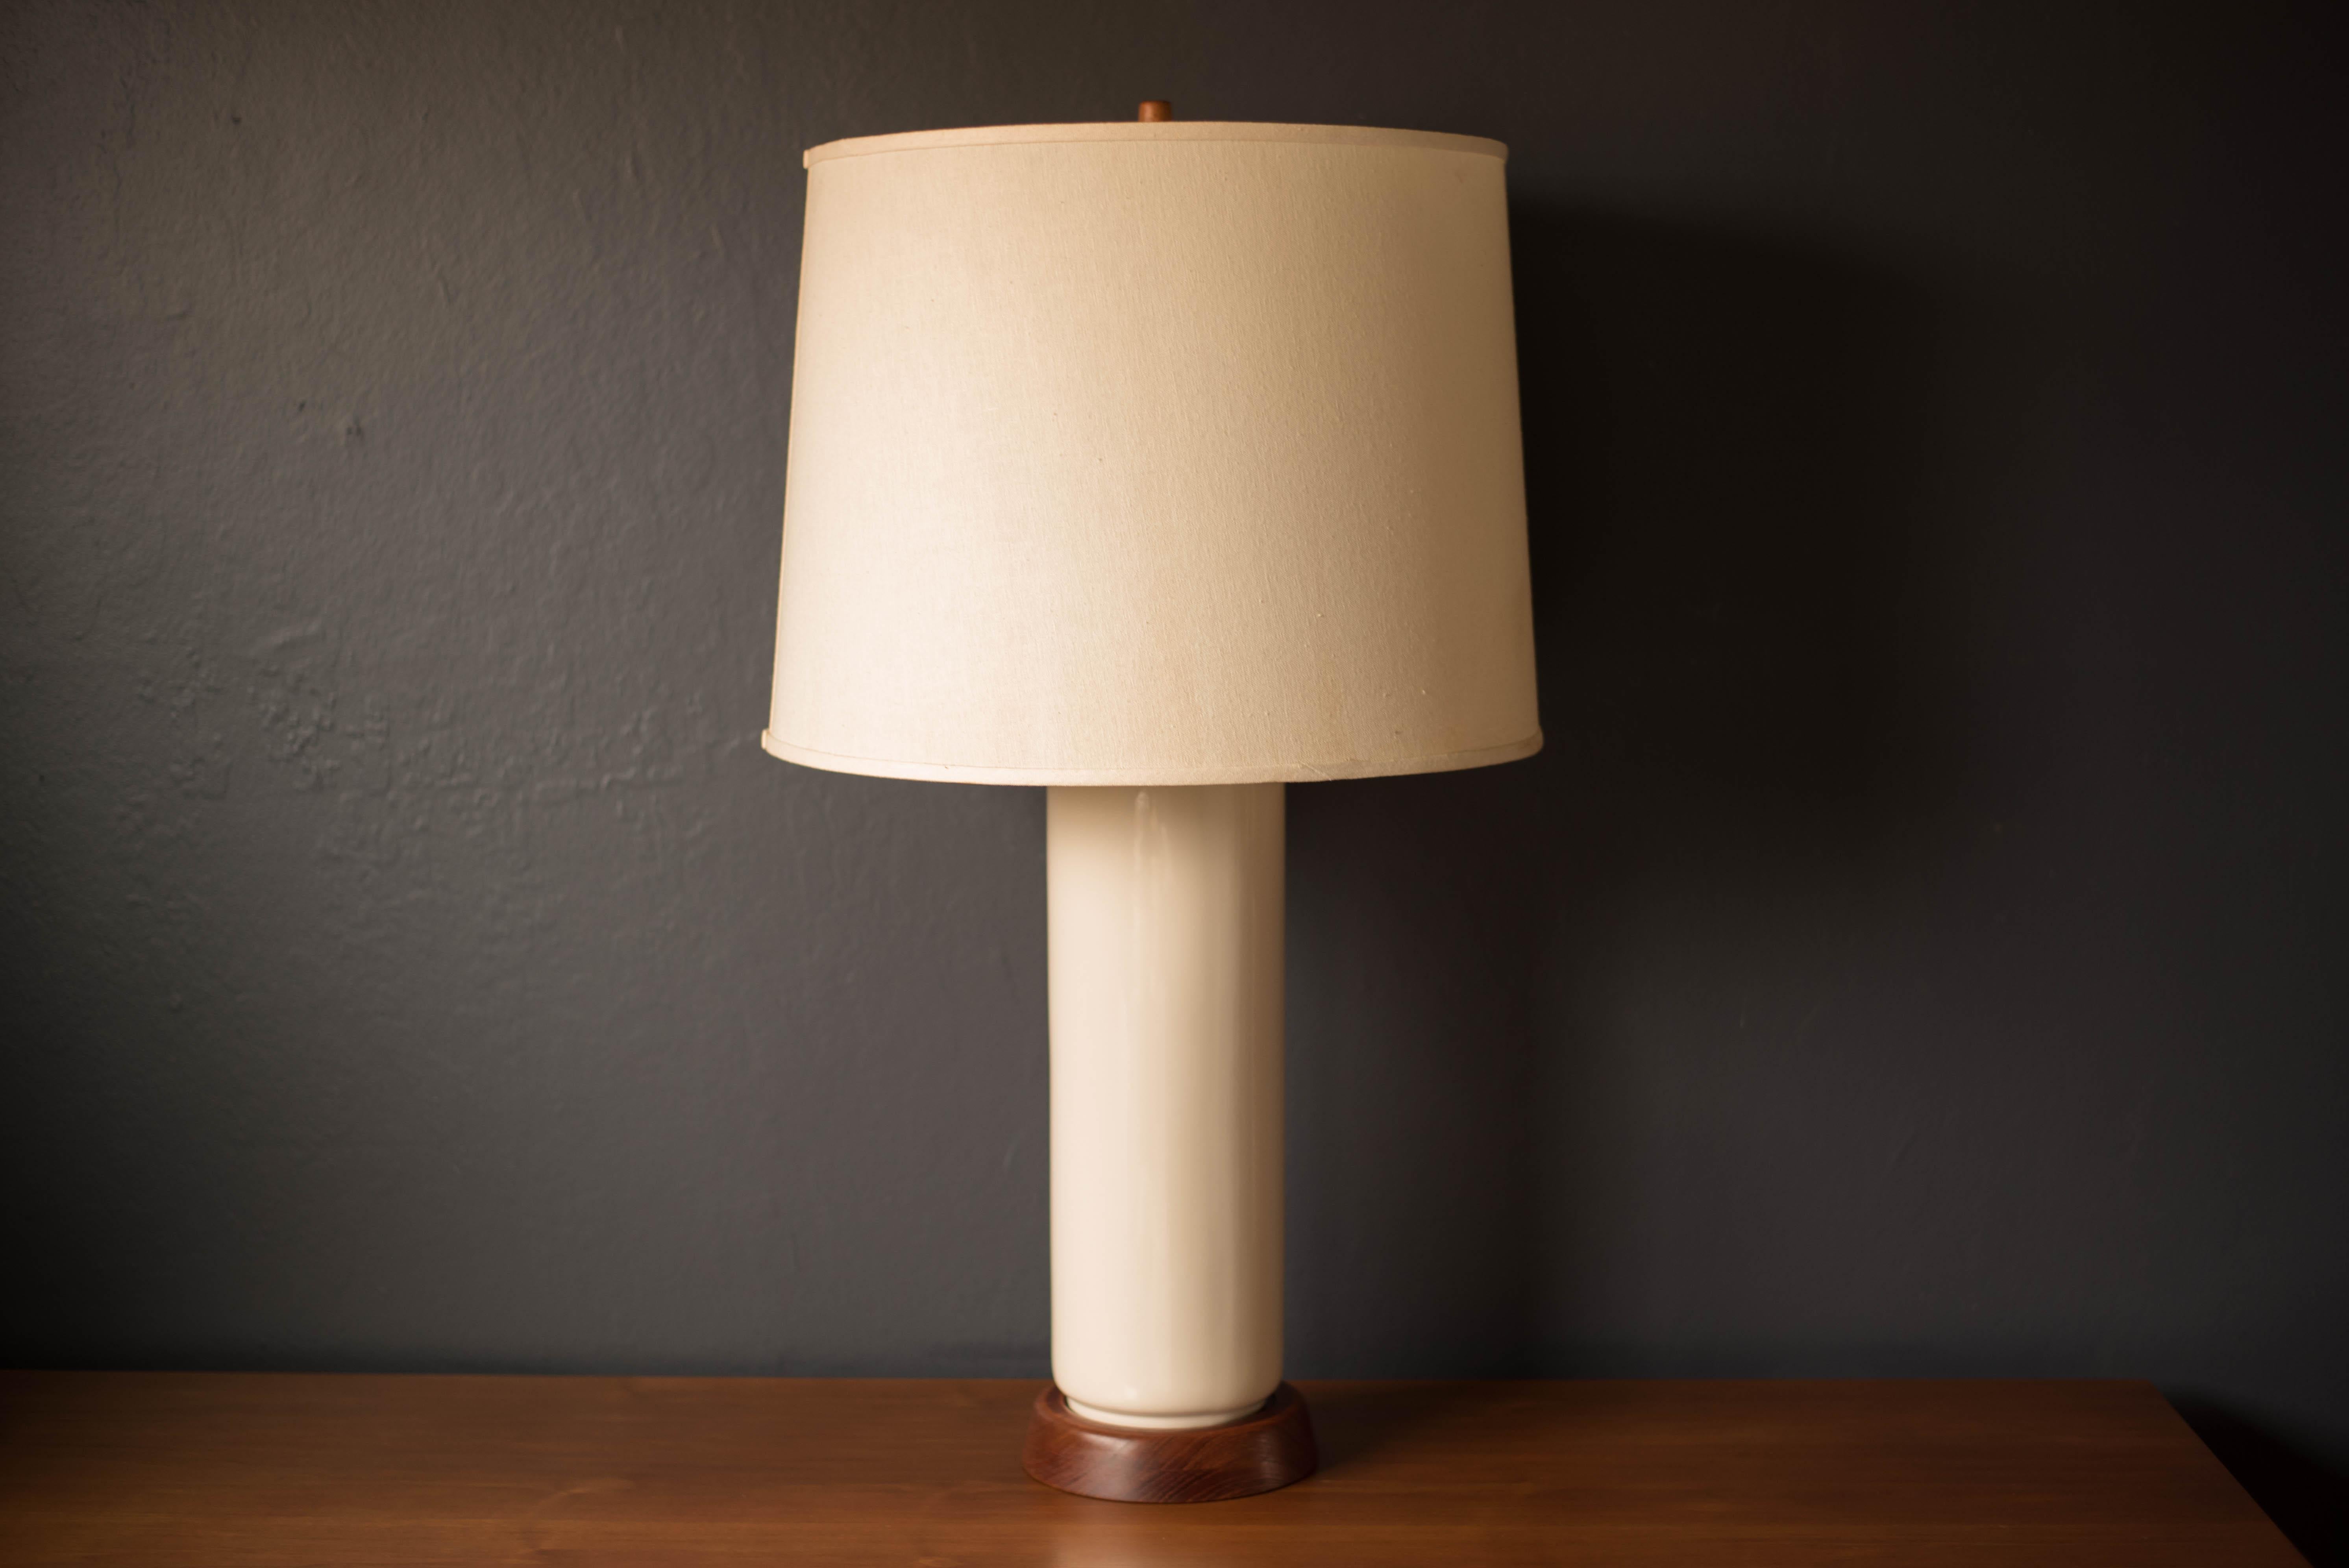 Mid Century Modern white cylinder table lamp, circa 1950s. This sculptural piece is accented with a walnut base and finial. Includes the original milk glass diffuser, brass socket, and drum shade. Functions with a three-way switch.